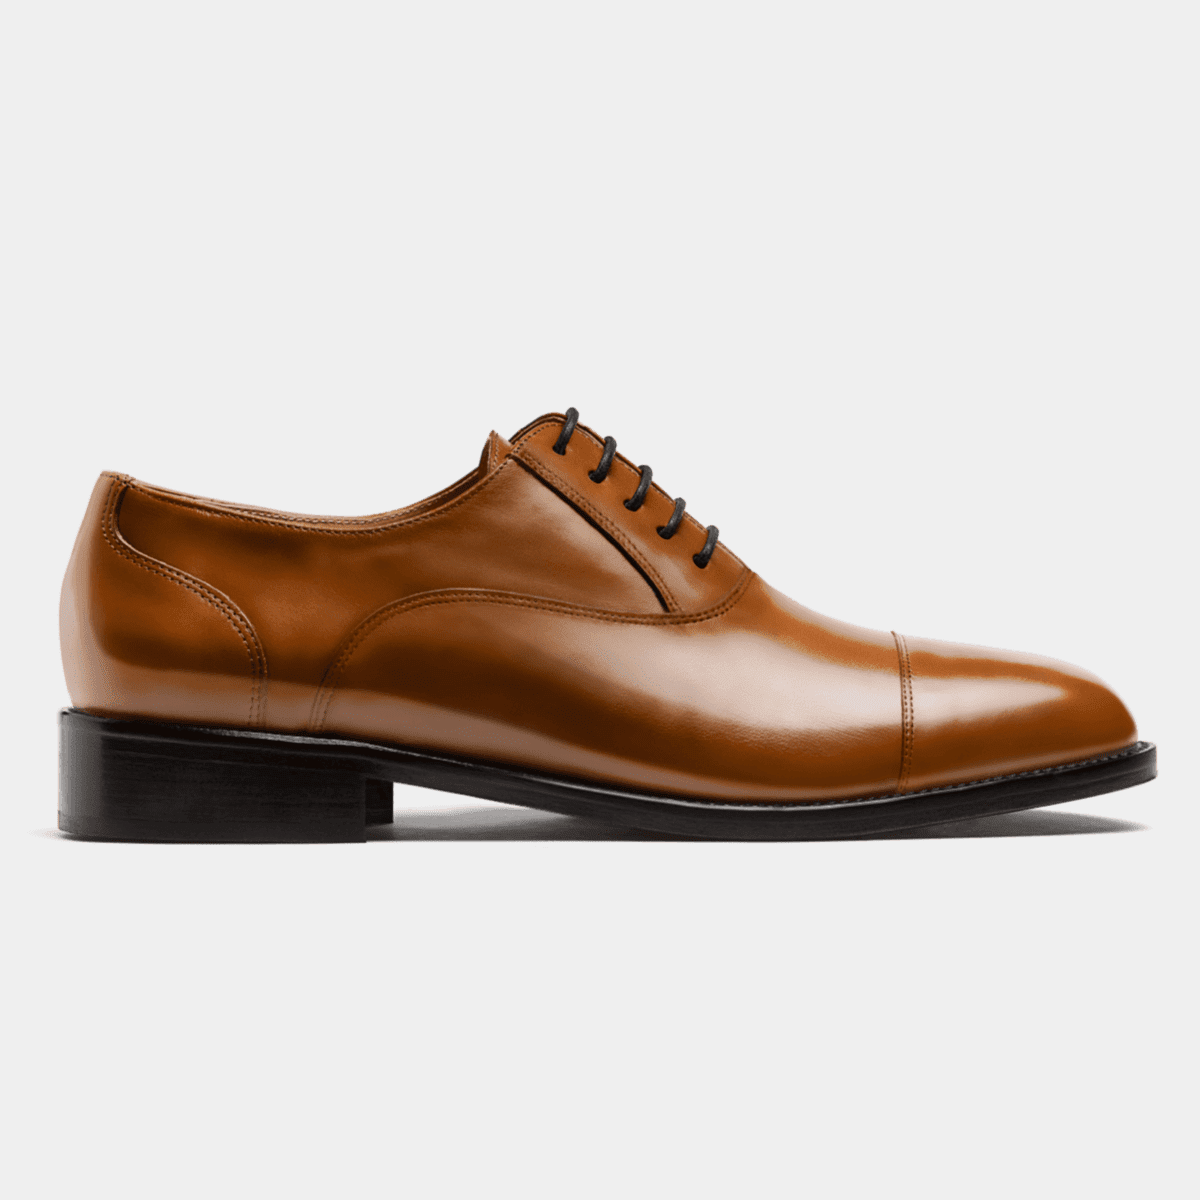 Absurd connect sick Bespoke Shoes for Men - Hockerty